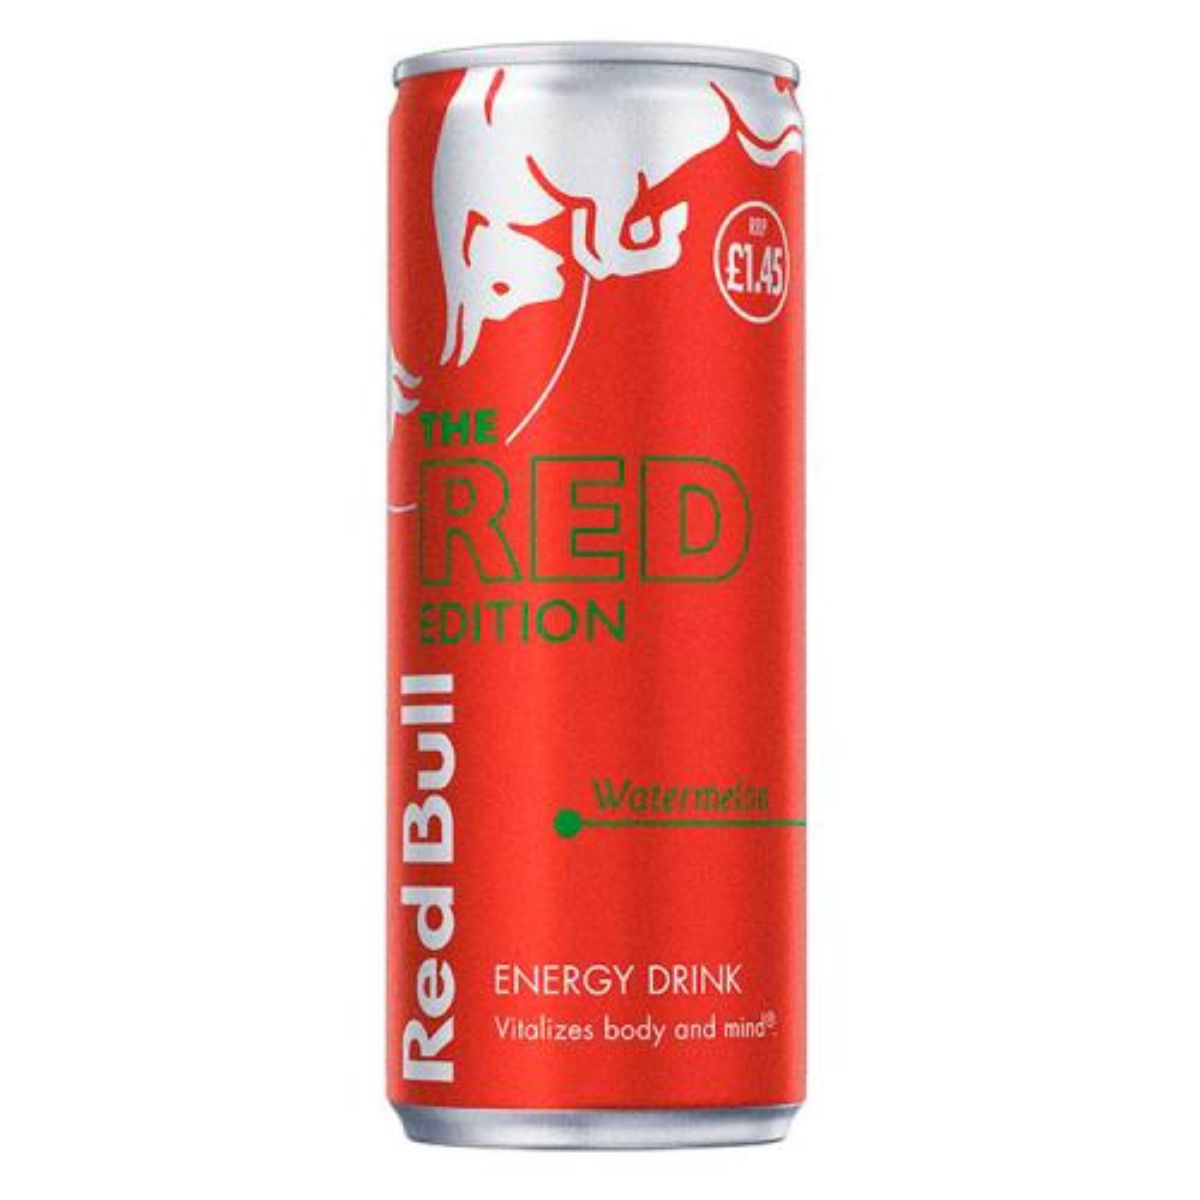 A can of Red Bull - The Red Edition Watermelon Energy Drink - 250ml on a white background.